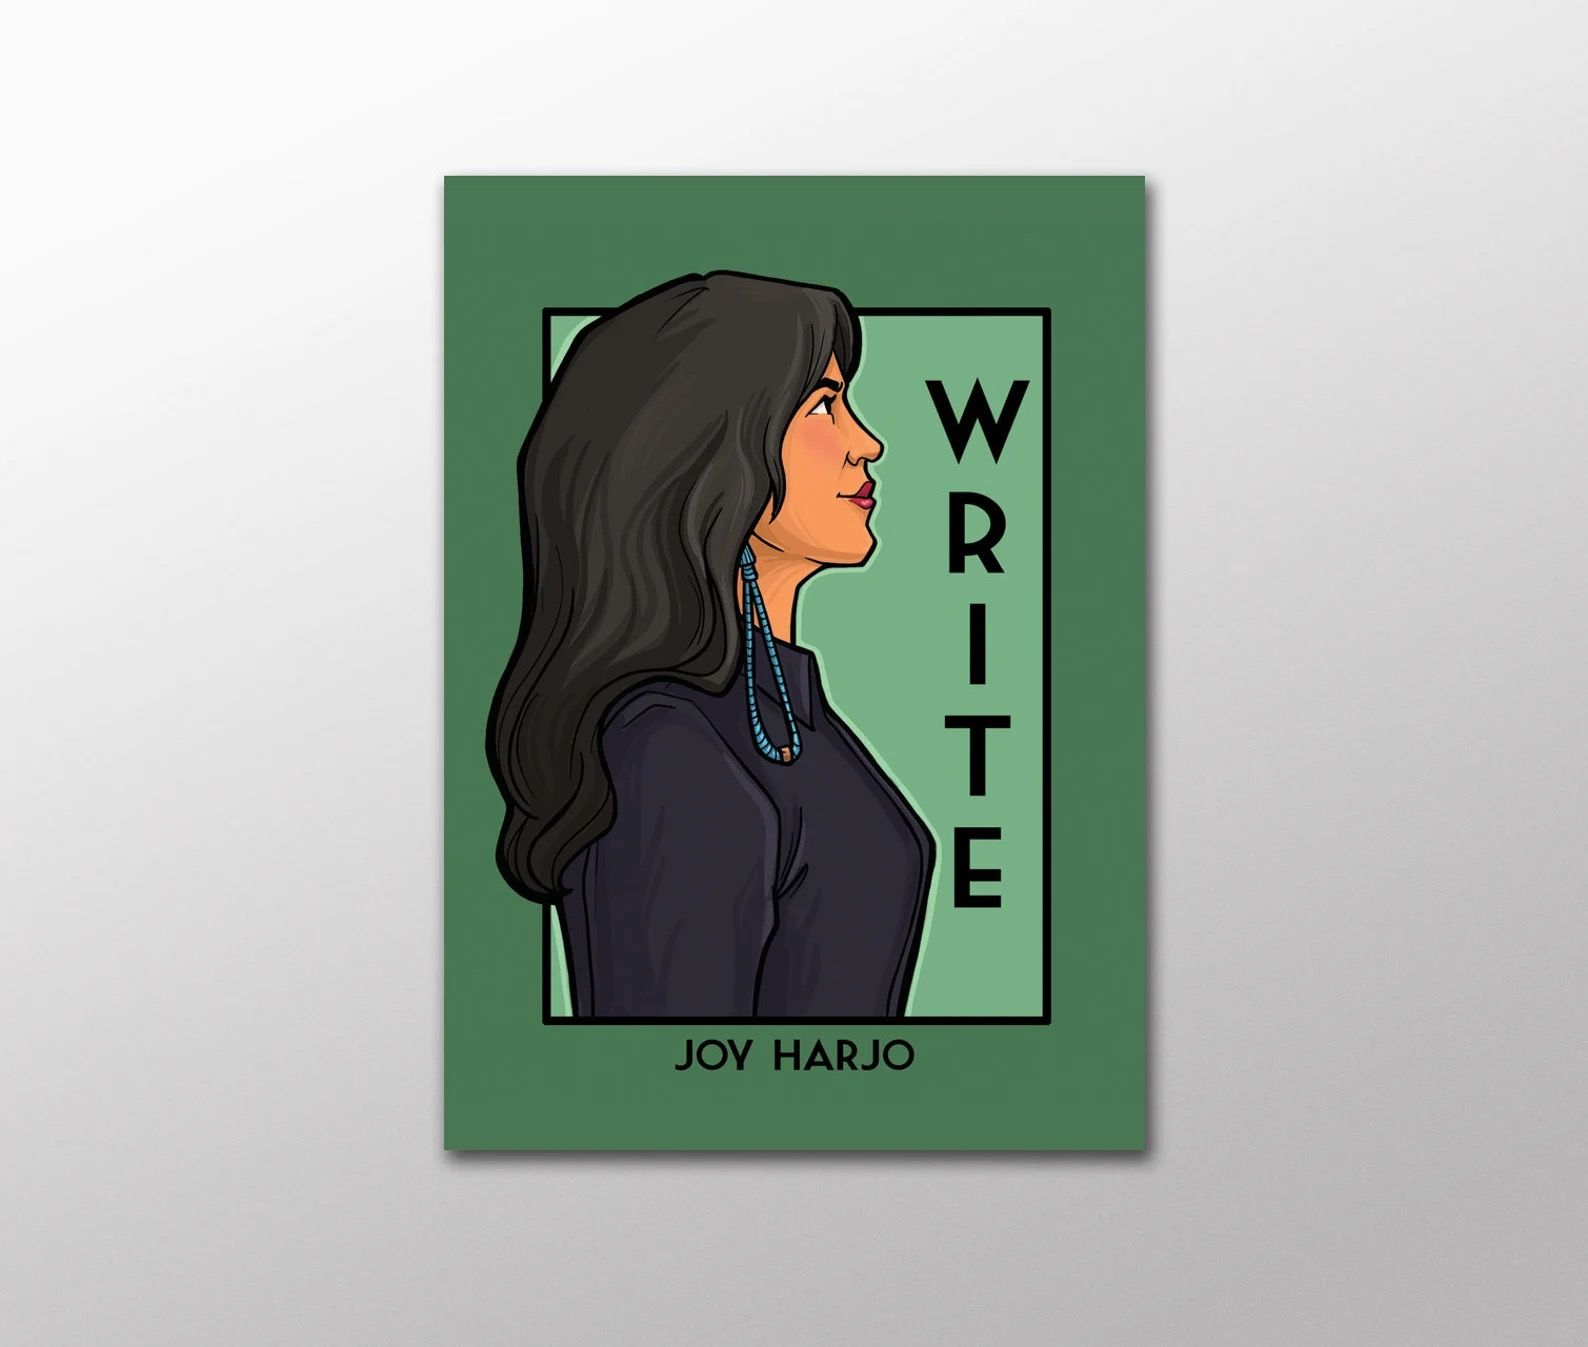 A postcard with a drawing of Joy Hard in profile, next to the words WRITE, written vertically. The background is dark green.